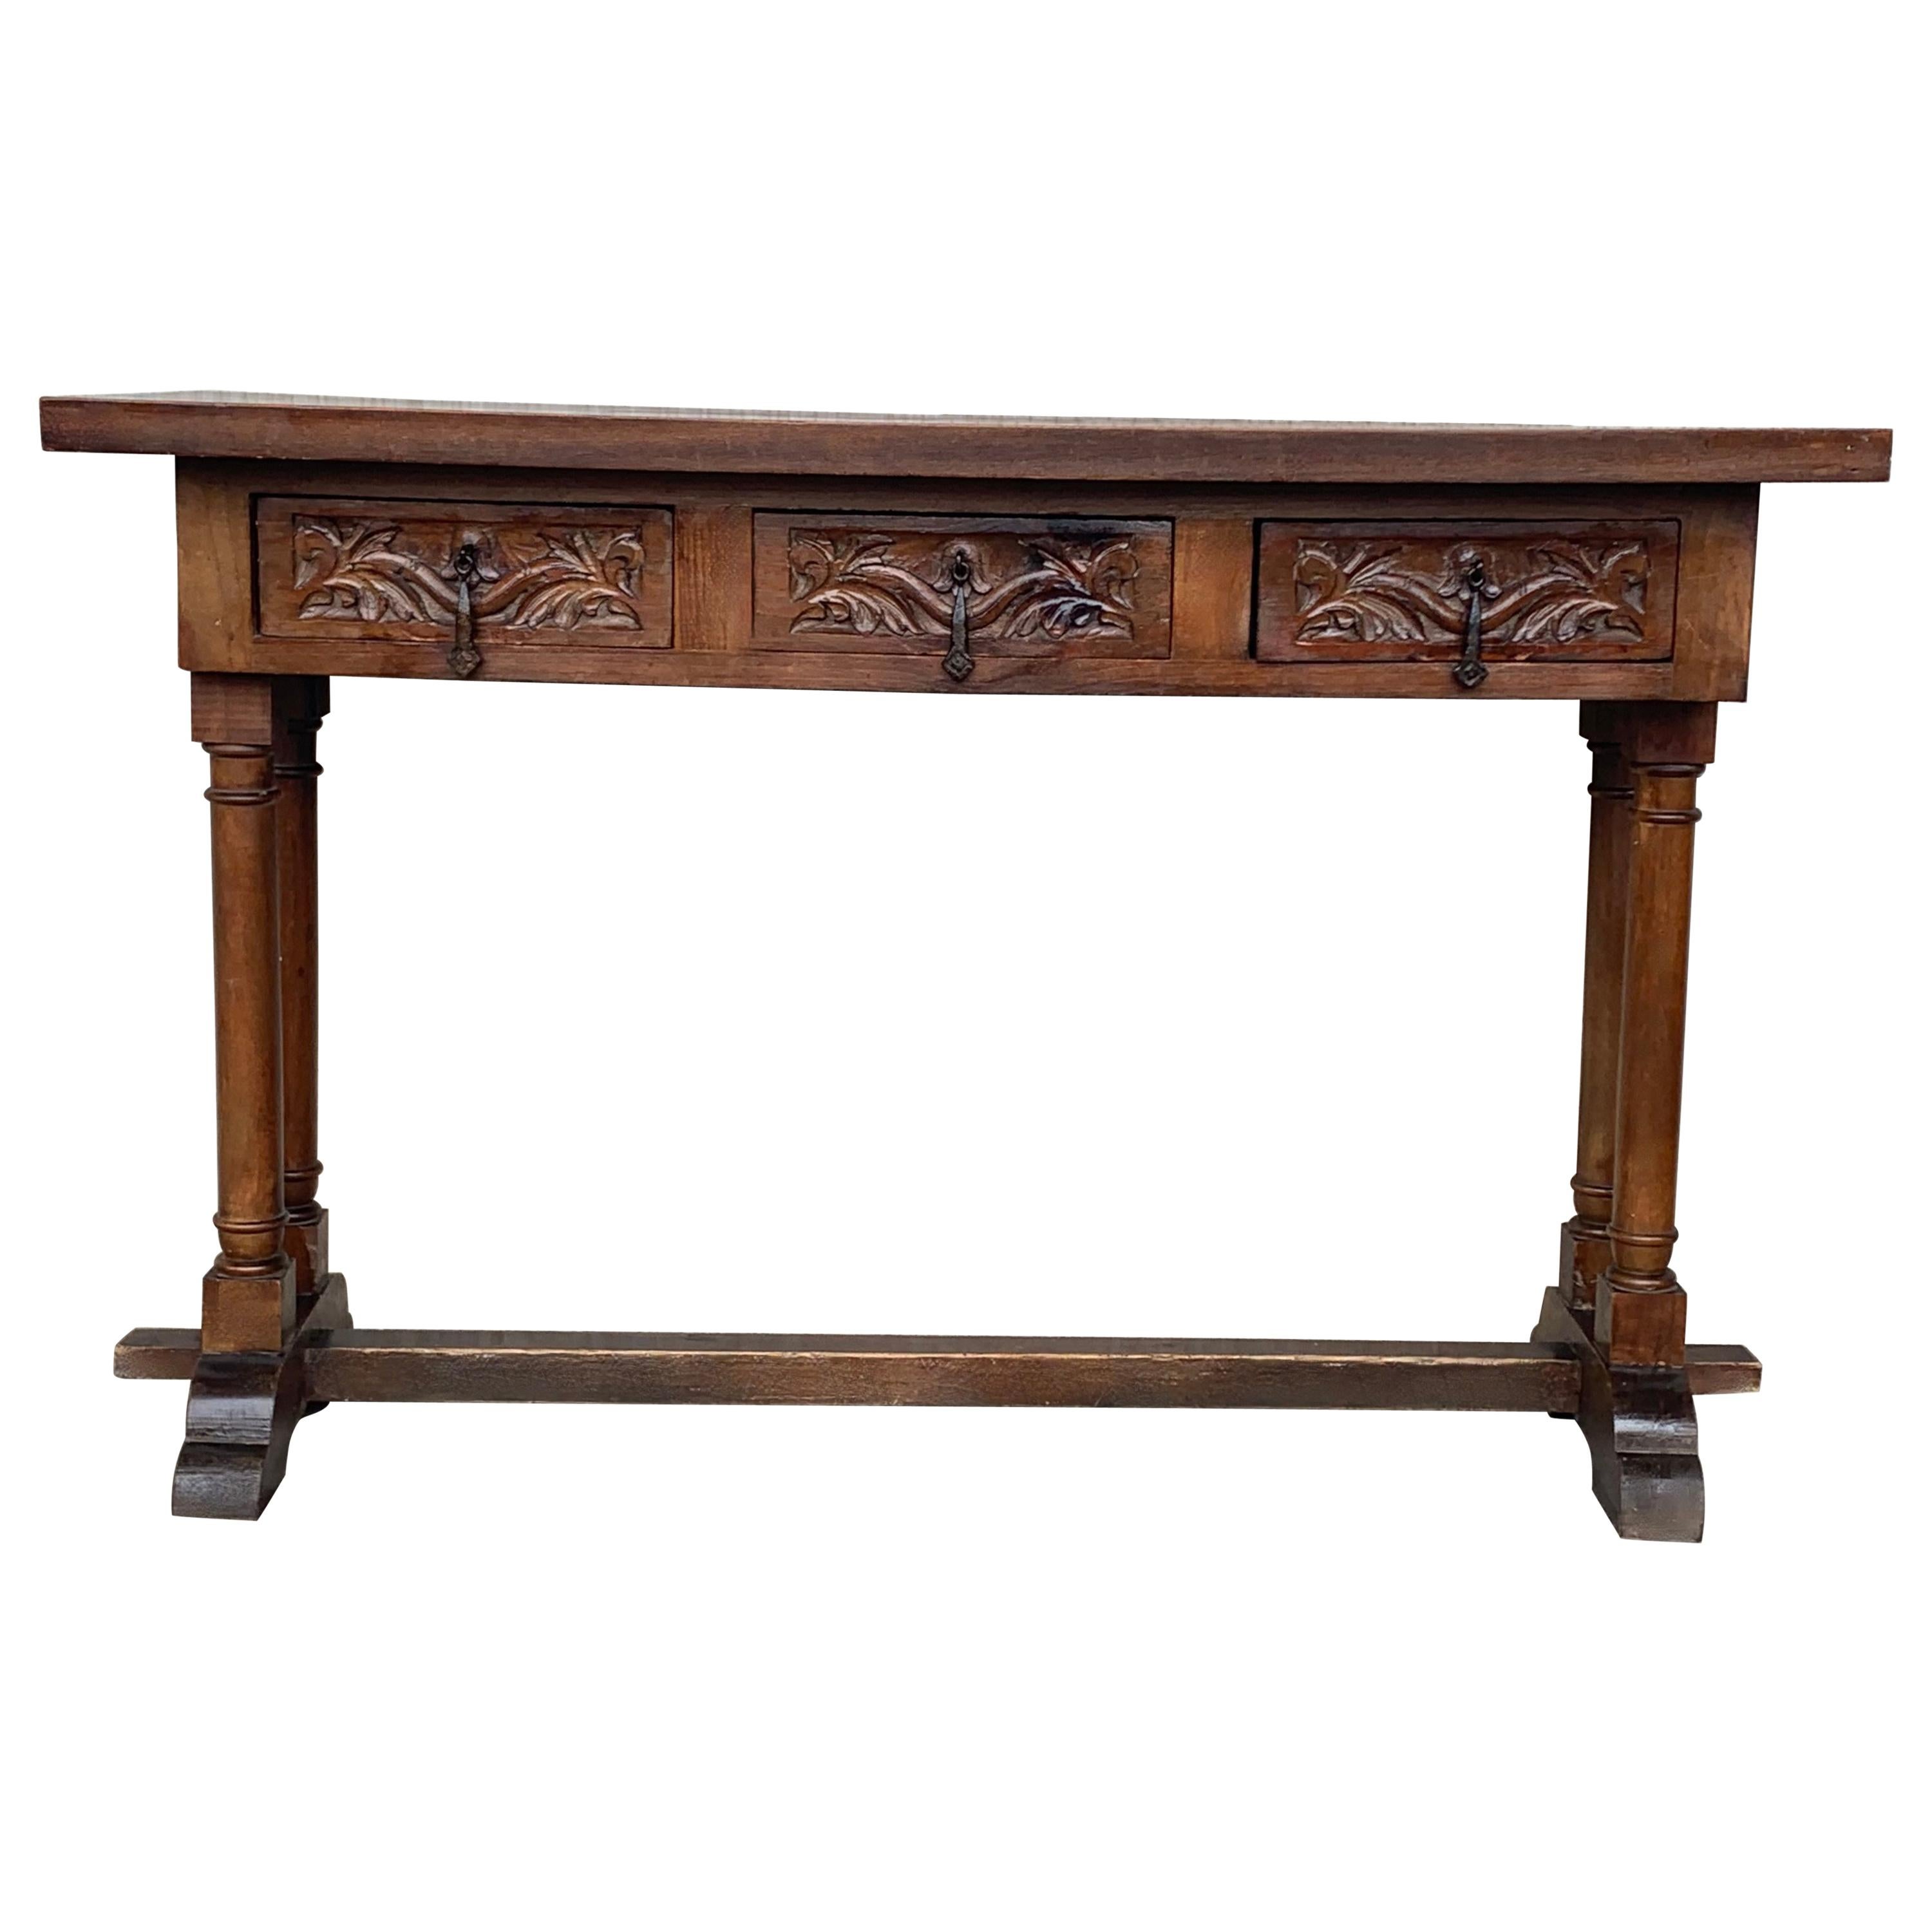 Baroque Console Table in Walnut with Three Carved Drawers and Stretcher